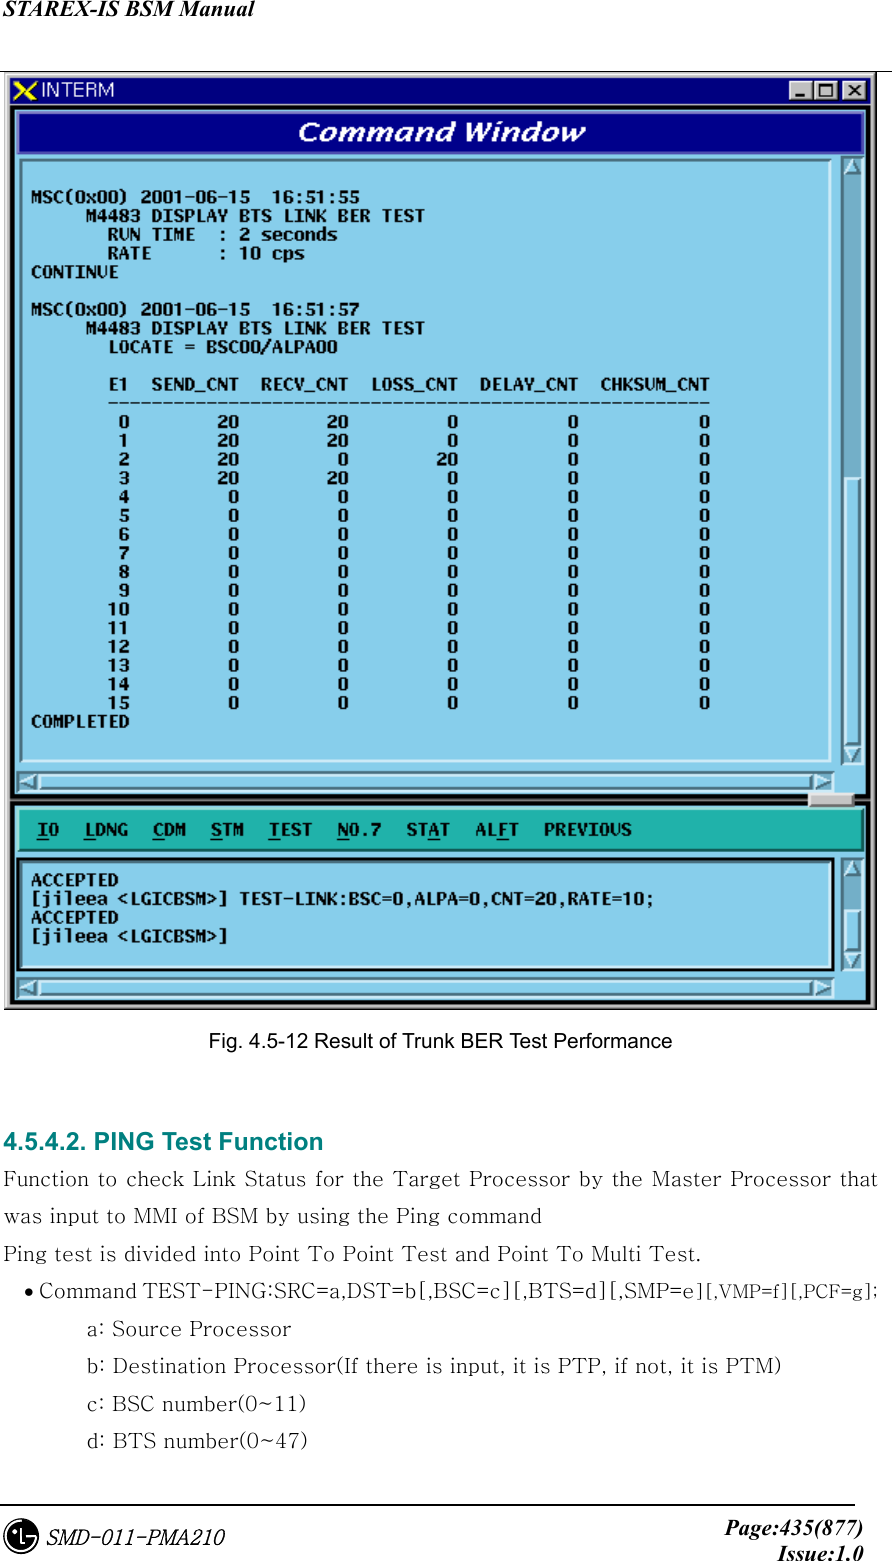 STAREX-IS BSM Manual     Page:435(877)Issue:1.0SMD-011-PMA210  Fig. 4.5-12 Result of Trunk BER Test Performance  4.5.4.2. PING Test Function Function to check Link Status for the Target Processor by the Master Processor that was input to MMI of BSM by using the Ping command Ping test is divided into Point To Point Test and Point To Multi Test. • Command TEST-PING:SRC=a,DST=b[,BSC=c][,BTS=d][,SMP=e][,VMP=f][,PCF=g];   a: Source Processor   b: Destination Processor(If there is input, it is PTP, if not, it is PTM)   c: BSC number(0~11)   d: BTS number(0~47) 